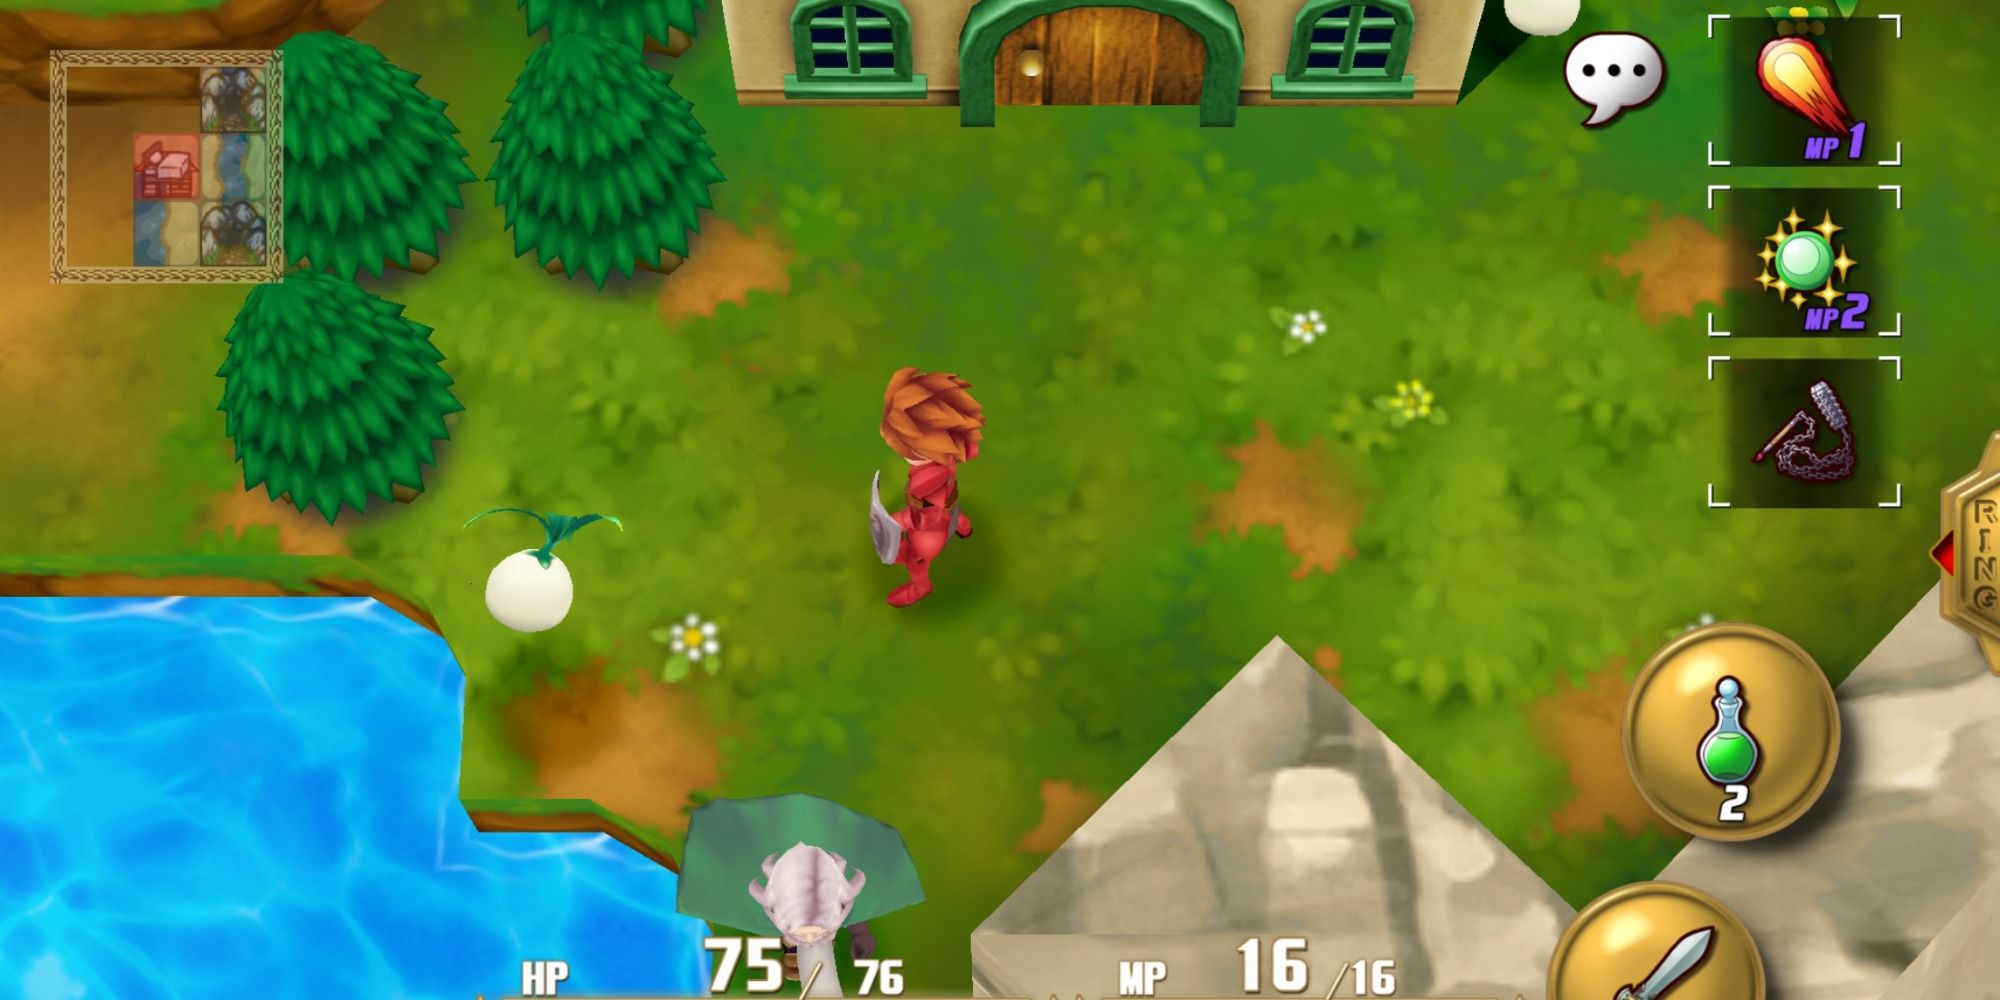 A screenshot showing gameplay in Adventures of Mana